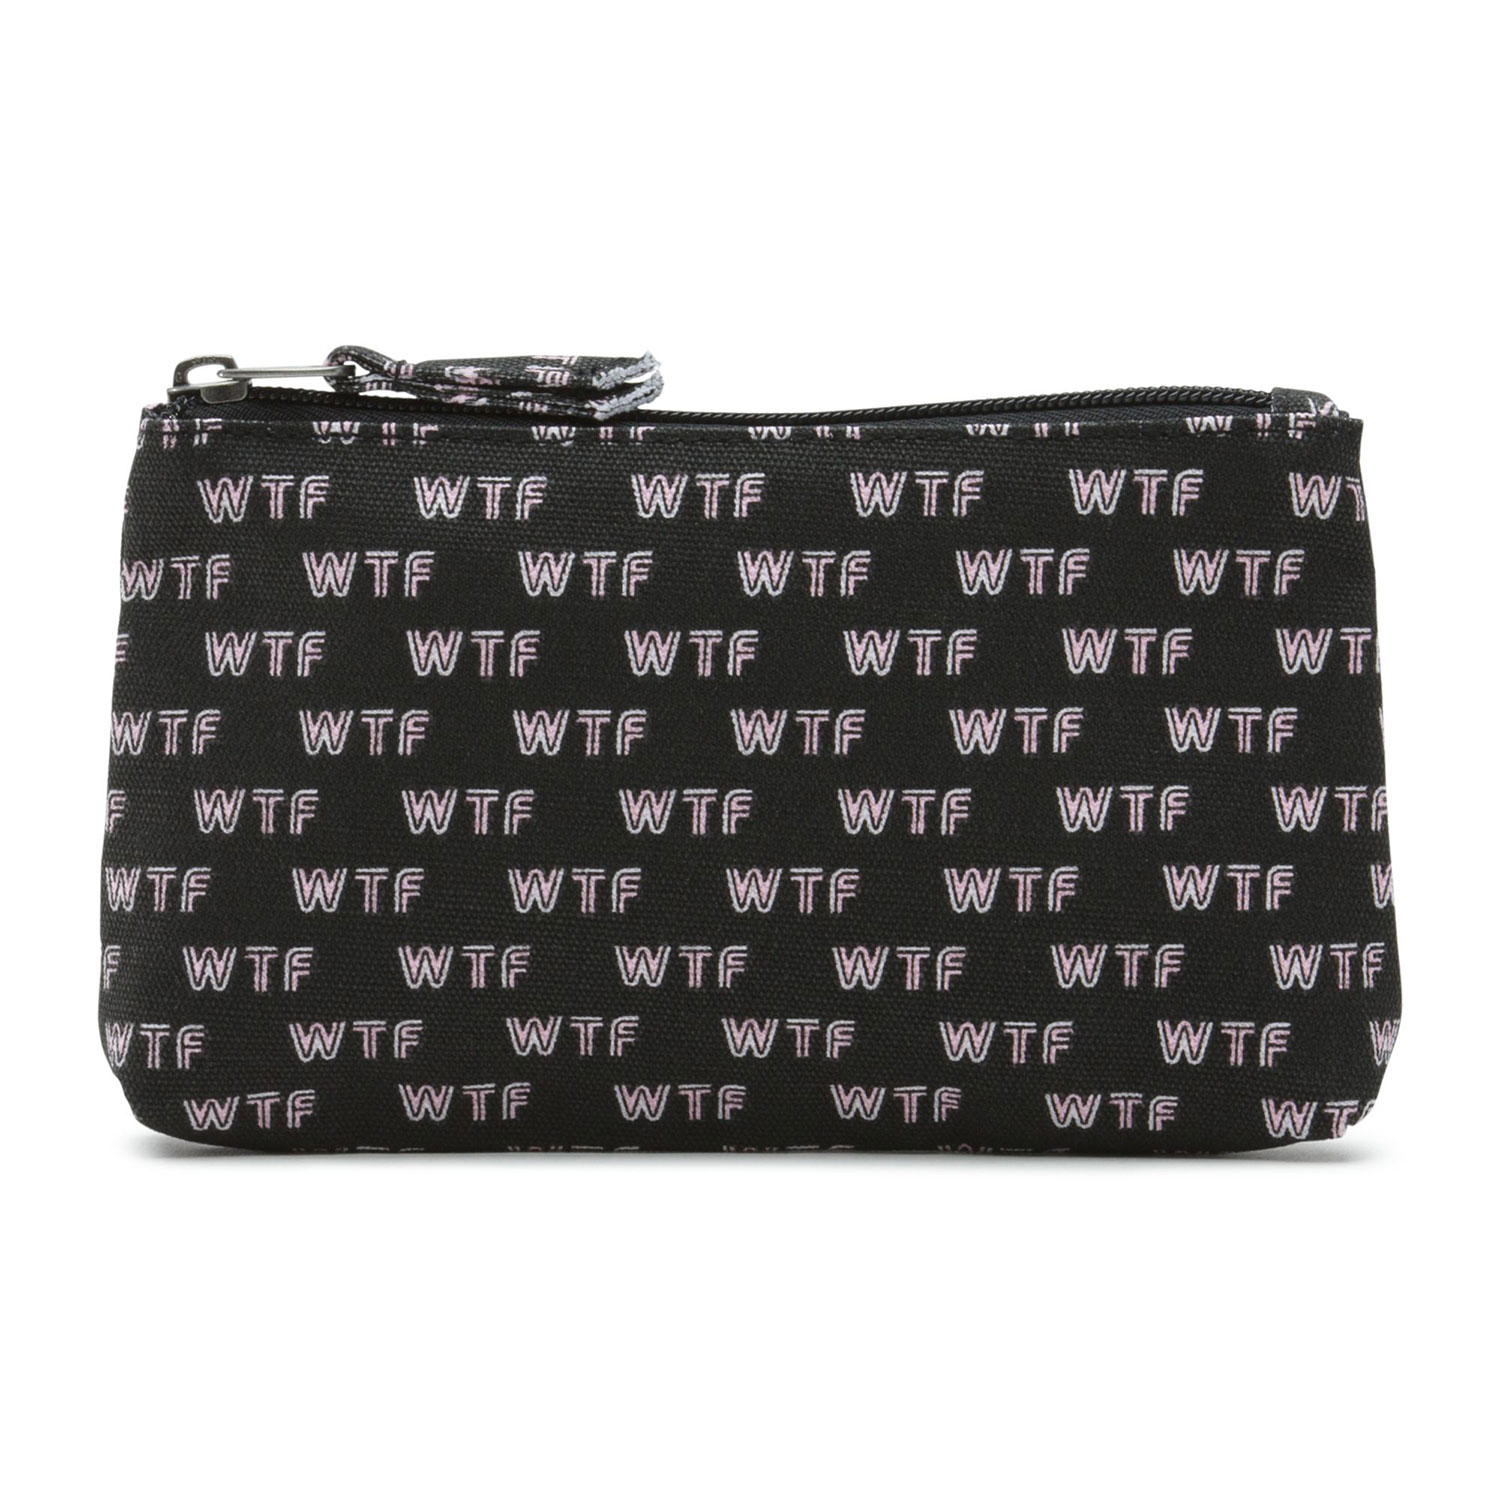 Vans OMG-WTF Homeroomie Small Pouch